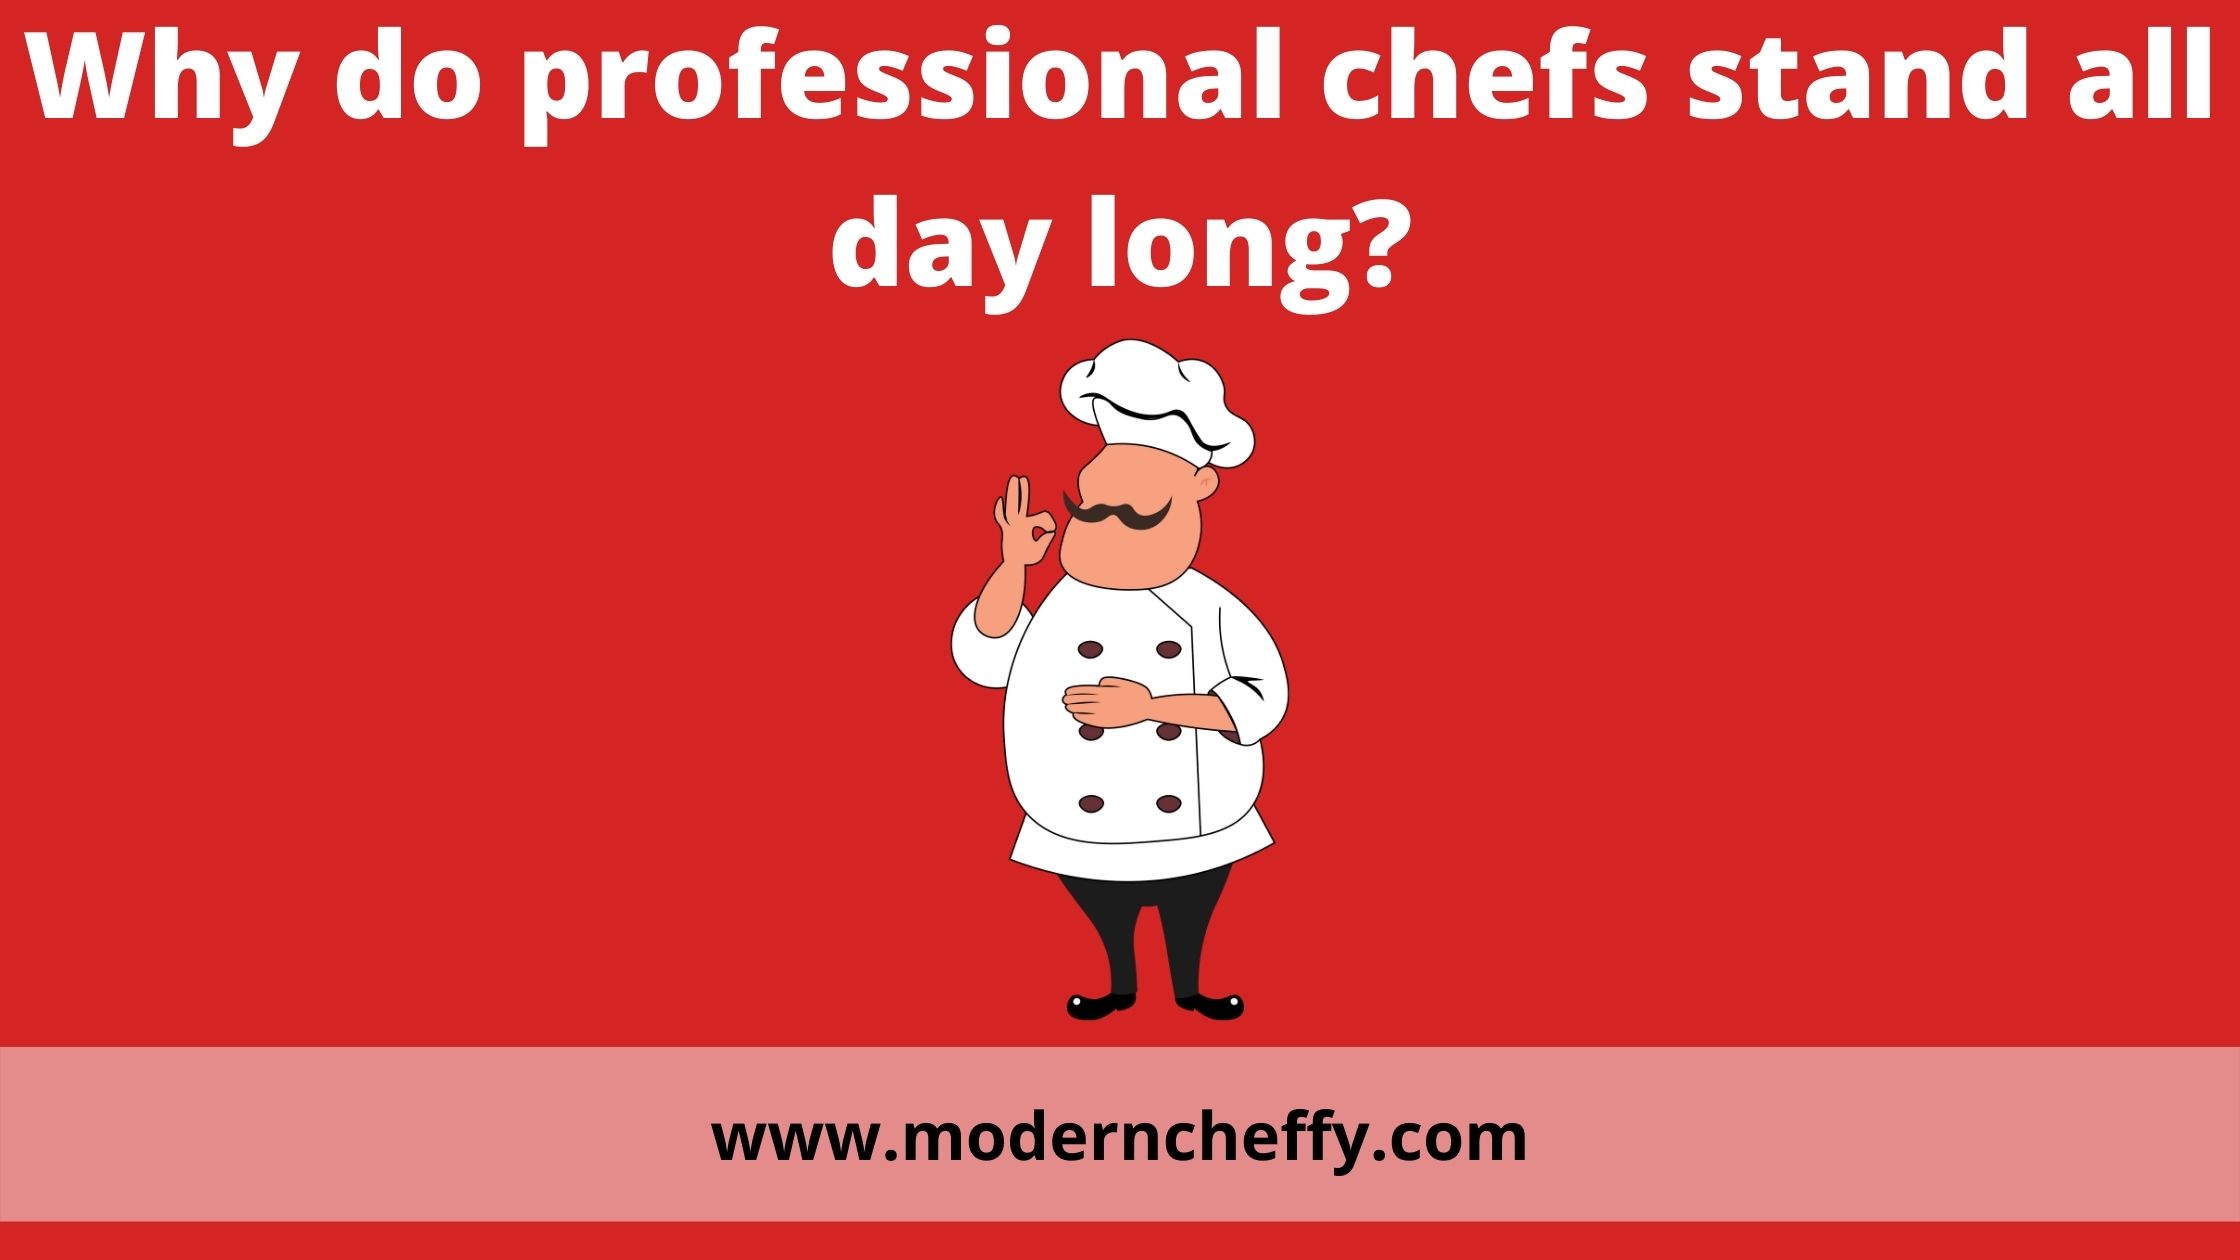 Why do professional chefs stand all day long